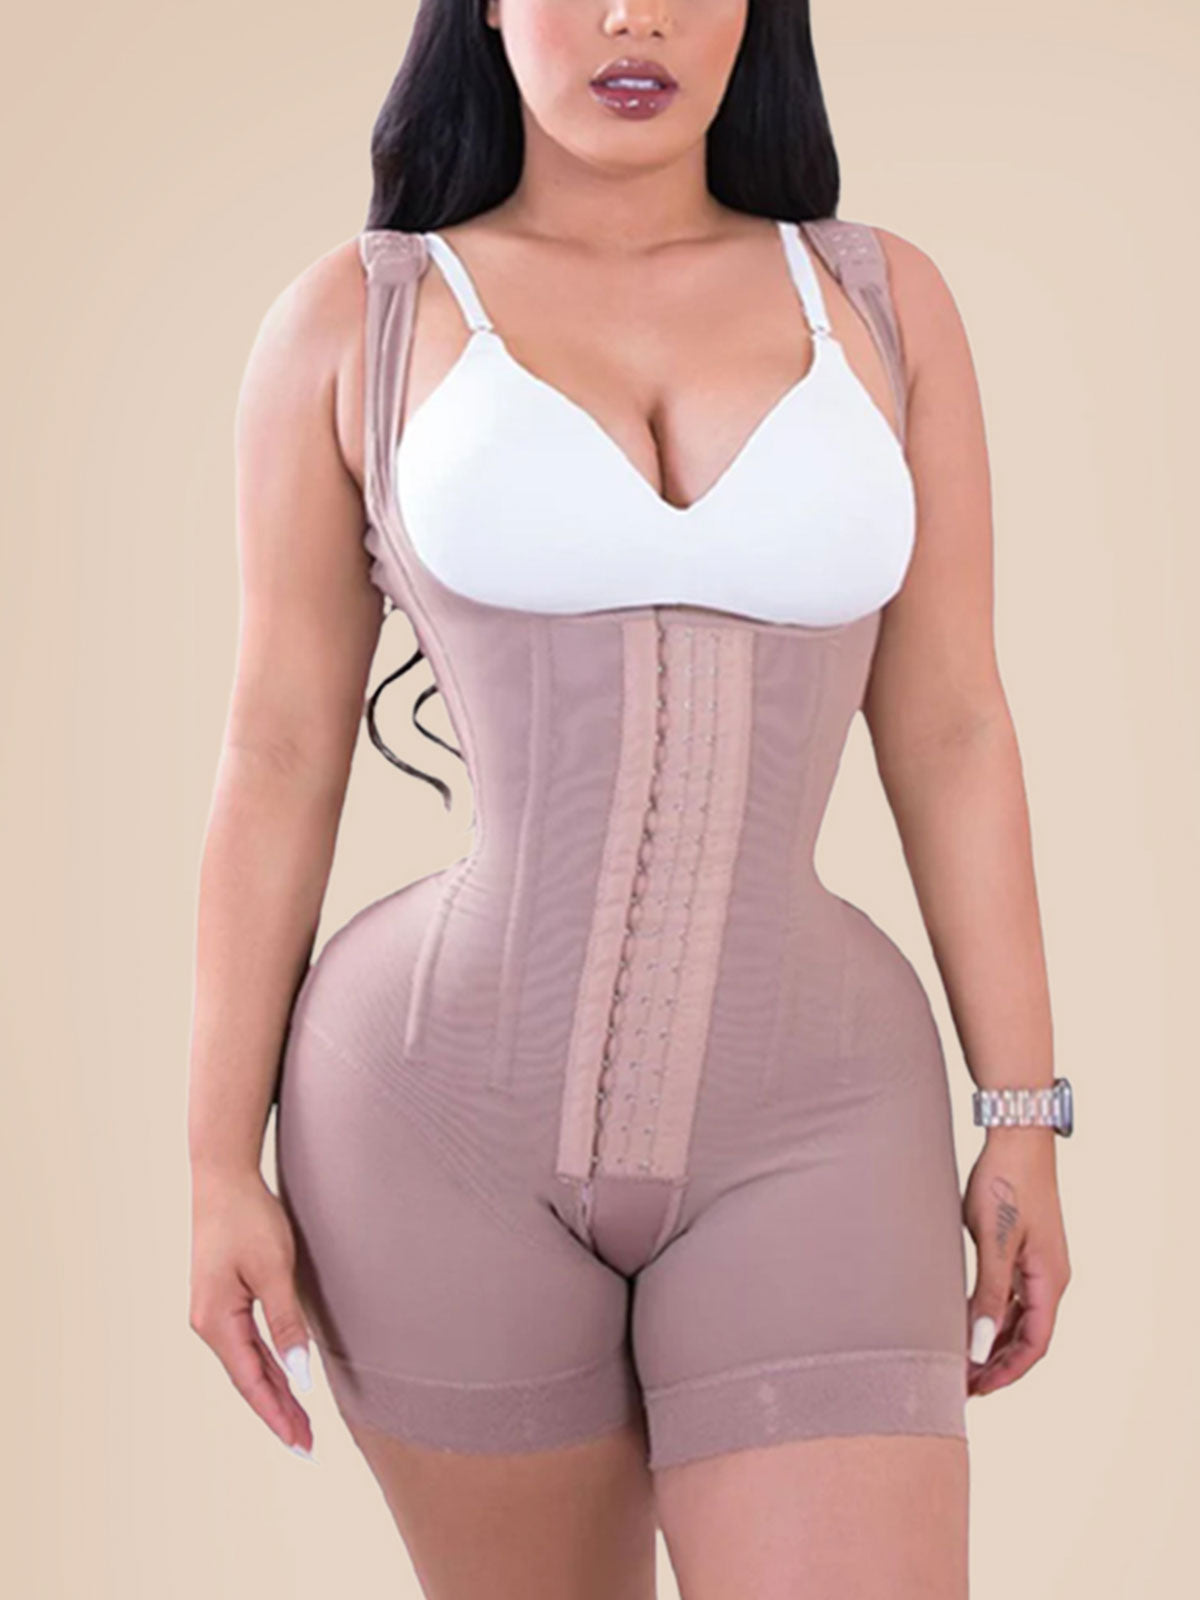 High Double Compression Garment Hook And Eye Closure Adjustable Bodysuit  Rf10052-ChicCurve